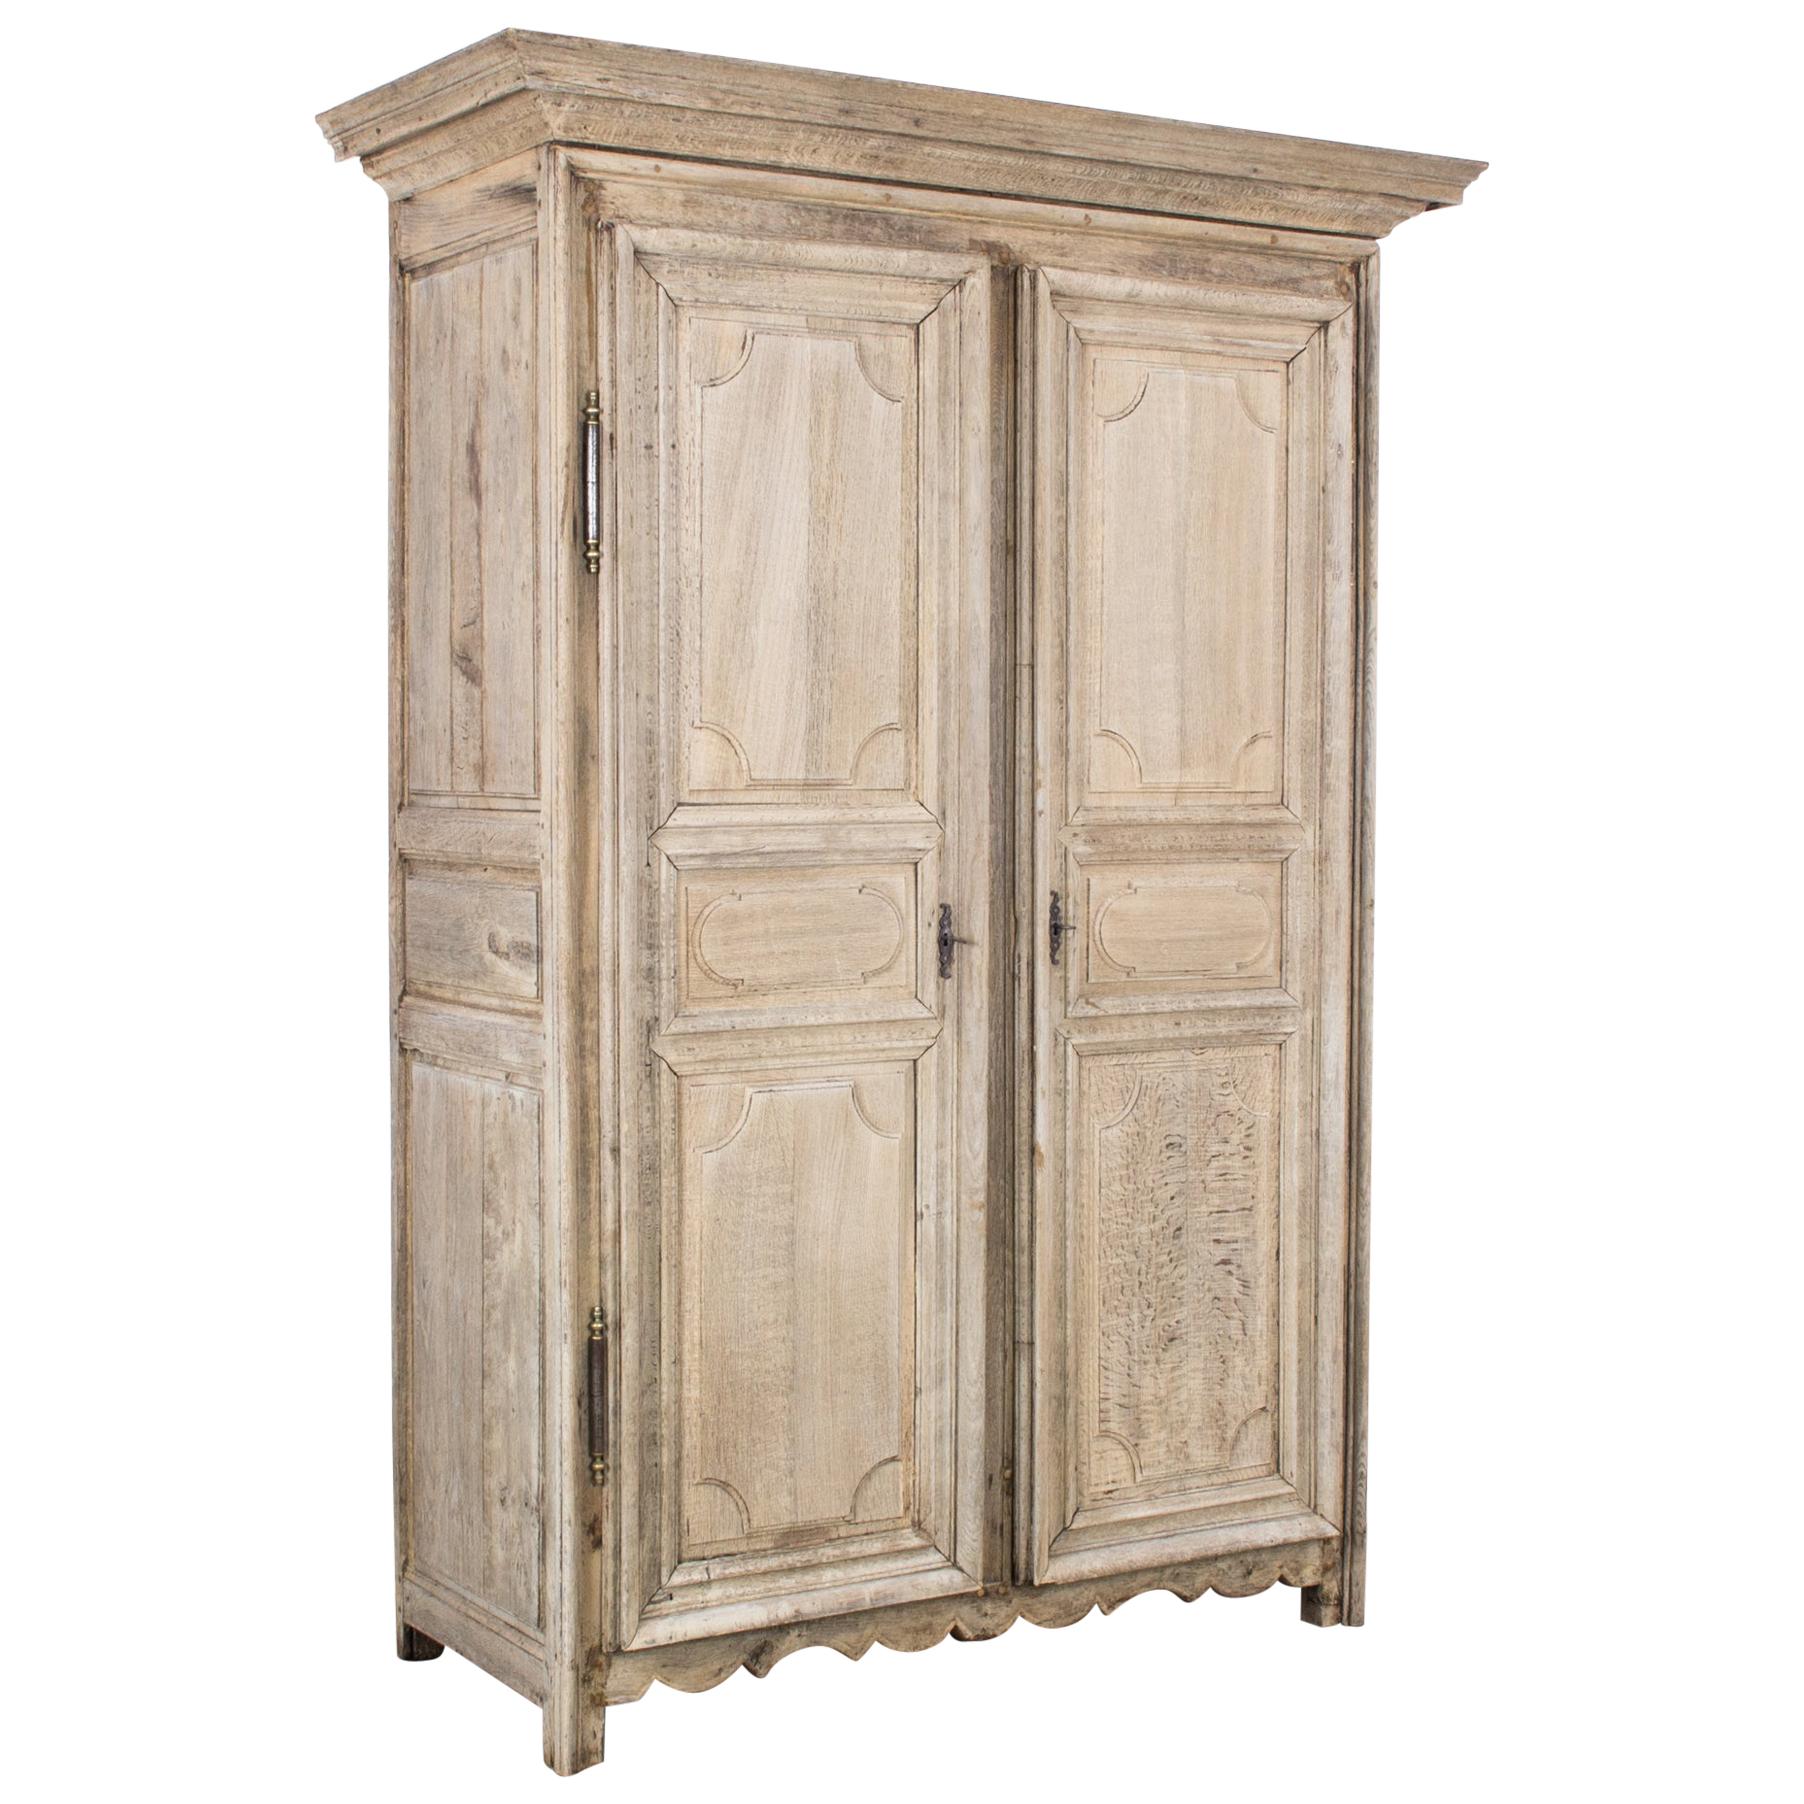 1800s French Bleached Oak Armoire